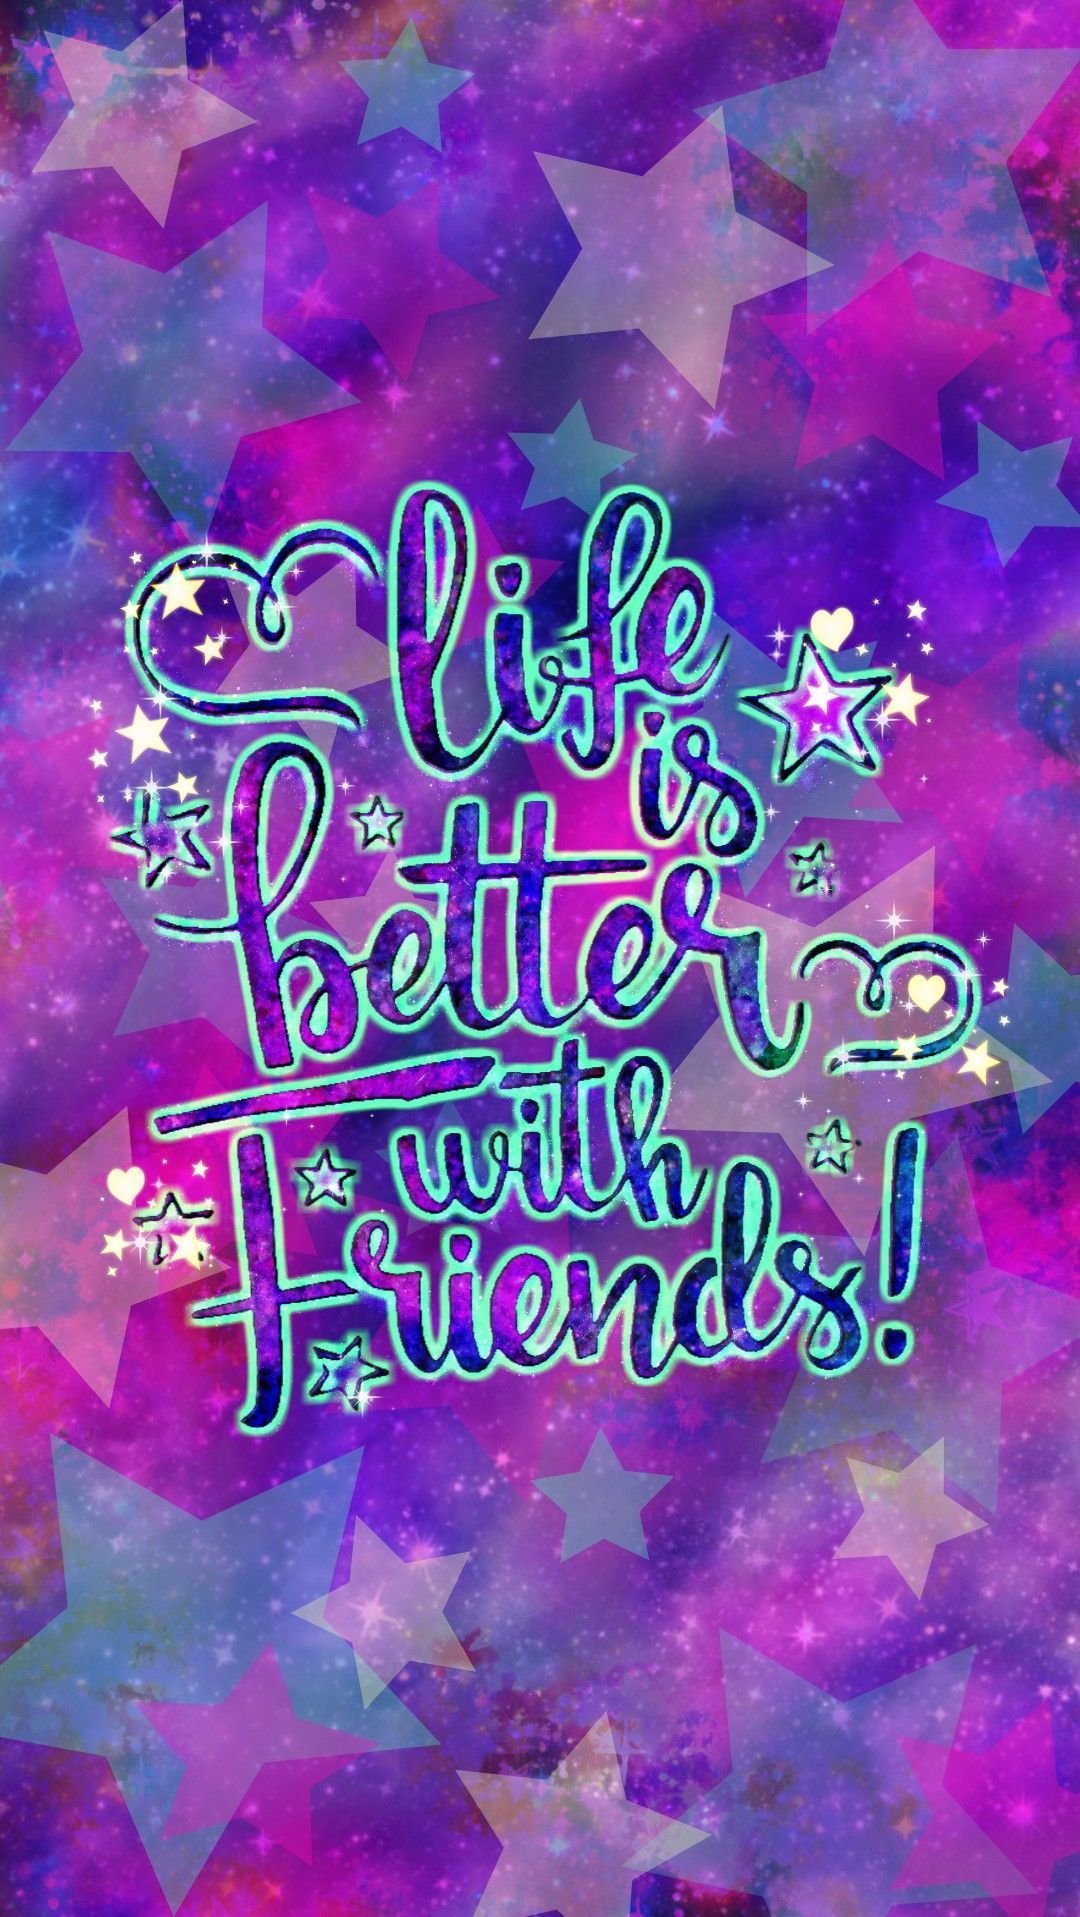 Friendship Quotes Wallpaper For Girls  Facebook Image Share